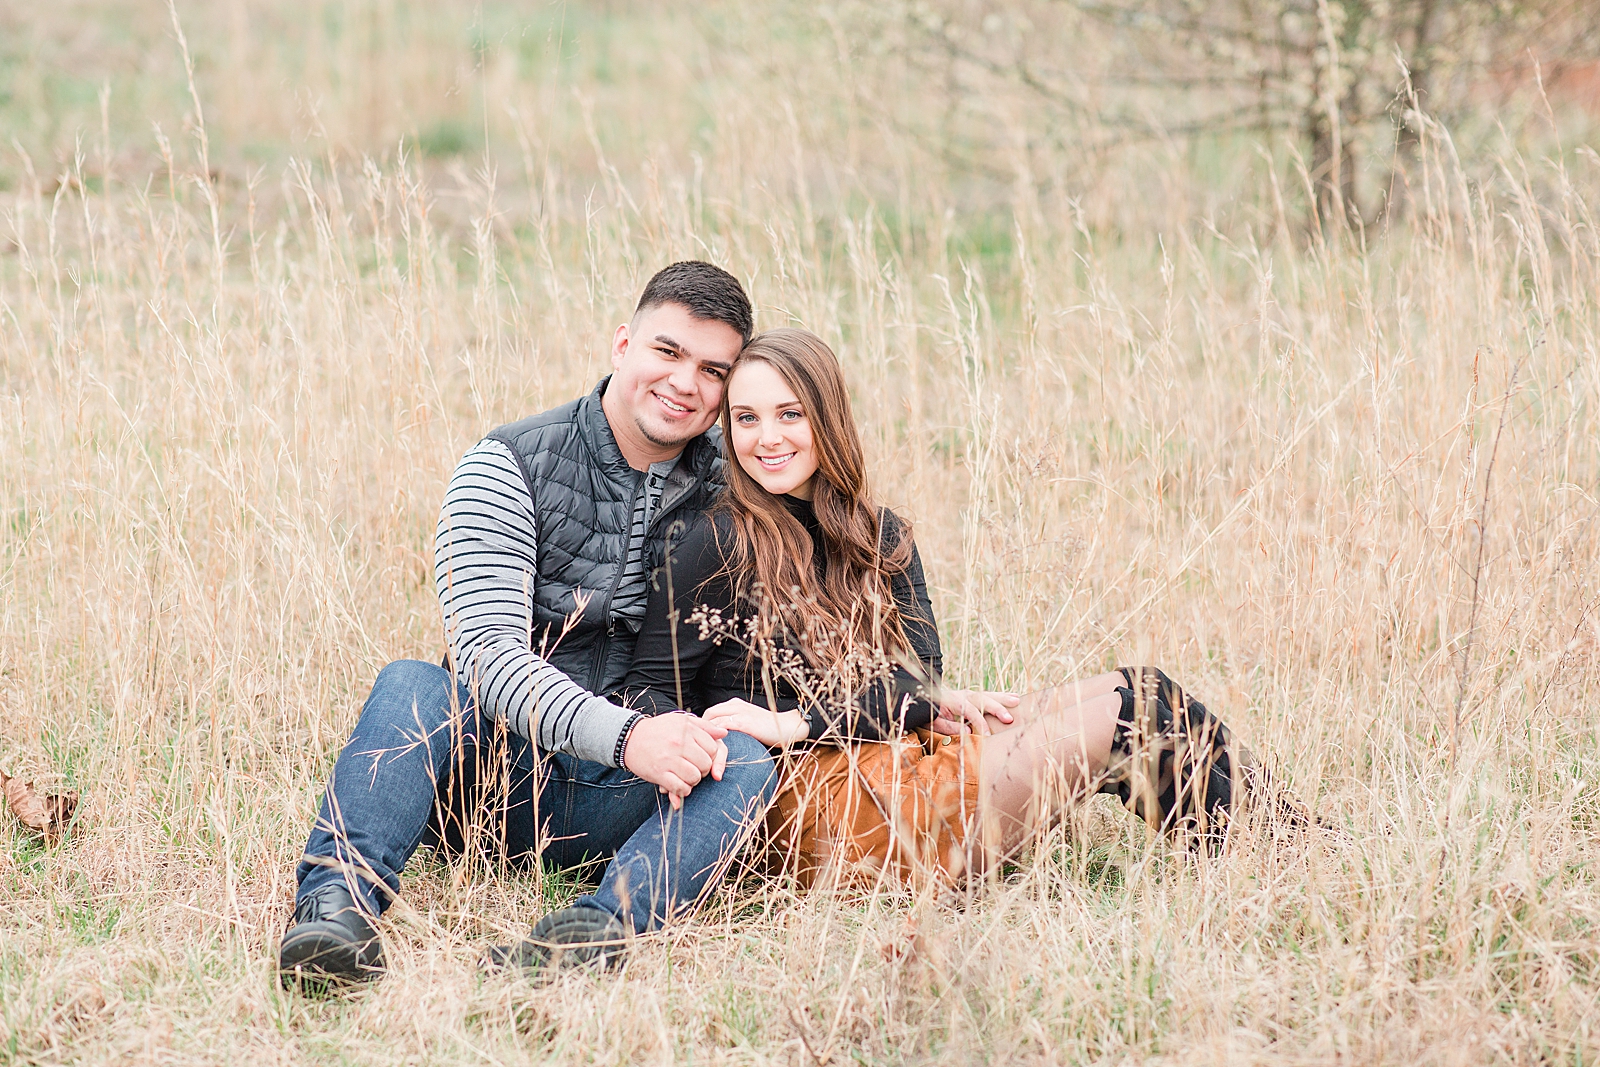 Andrews NC Spring Session Couple sitting in field of tall grass smiling at camera Photo